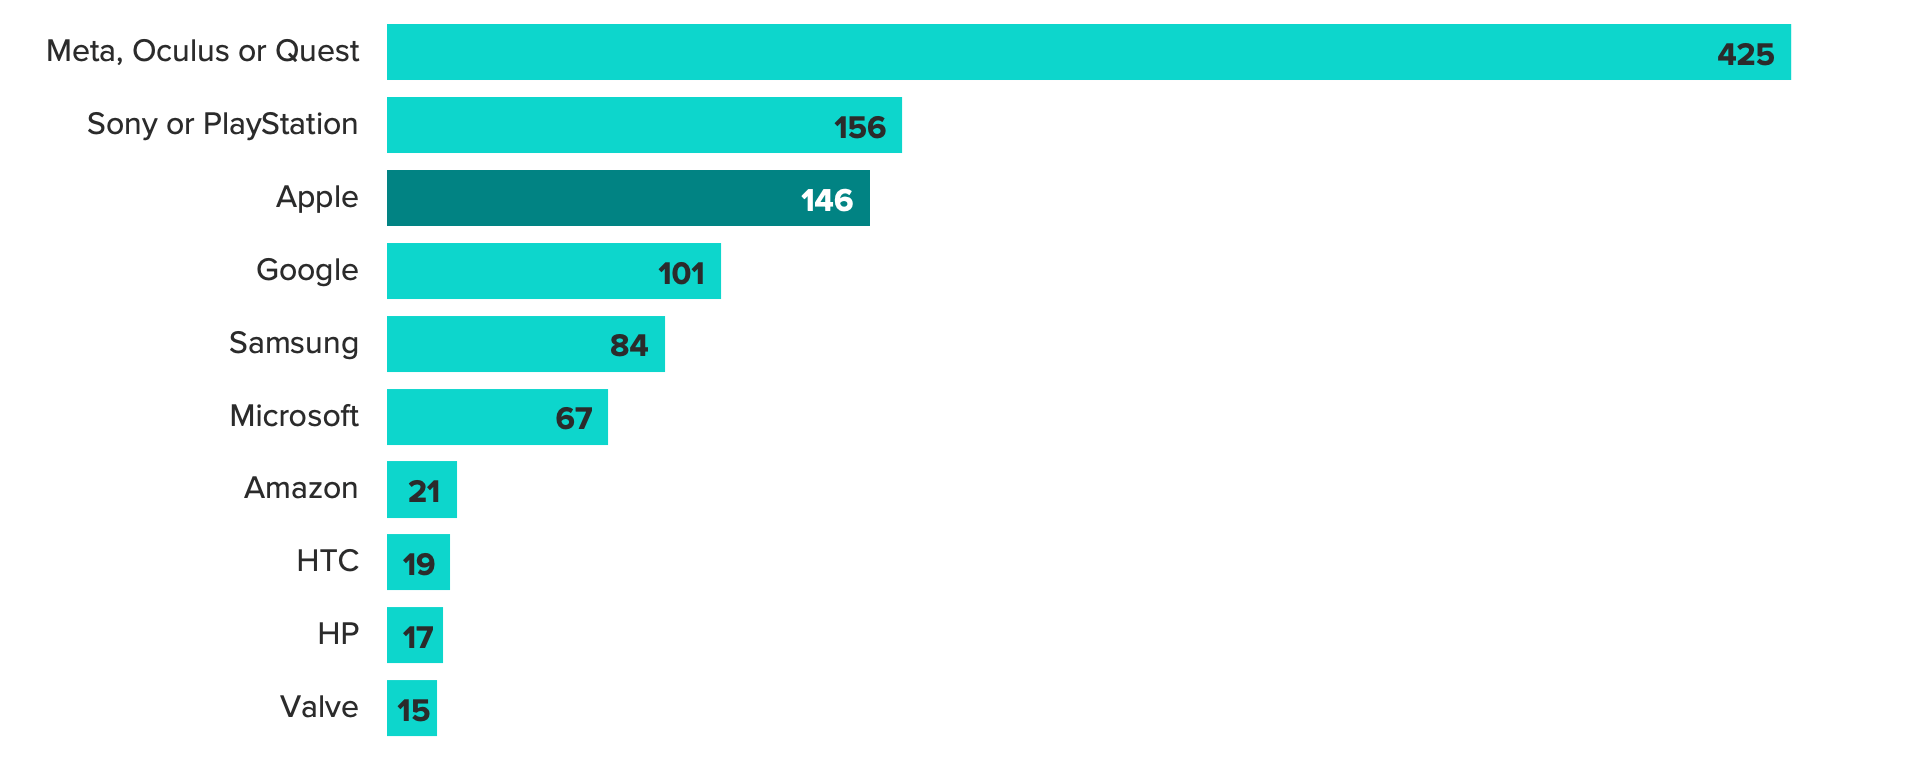 Bar chart of the number of mentions of each brand when respondents were asked to name the company they're most interested in buying VR hardware from. The chart shows Apple was the third-most mentioned despite not having an offering yet.